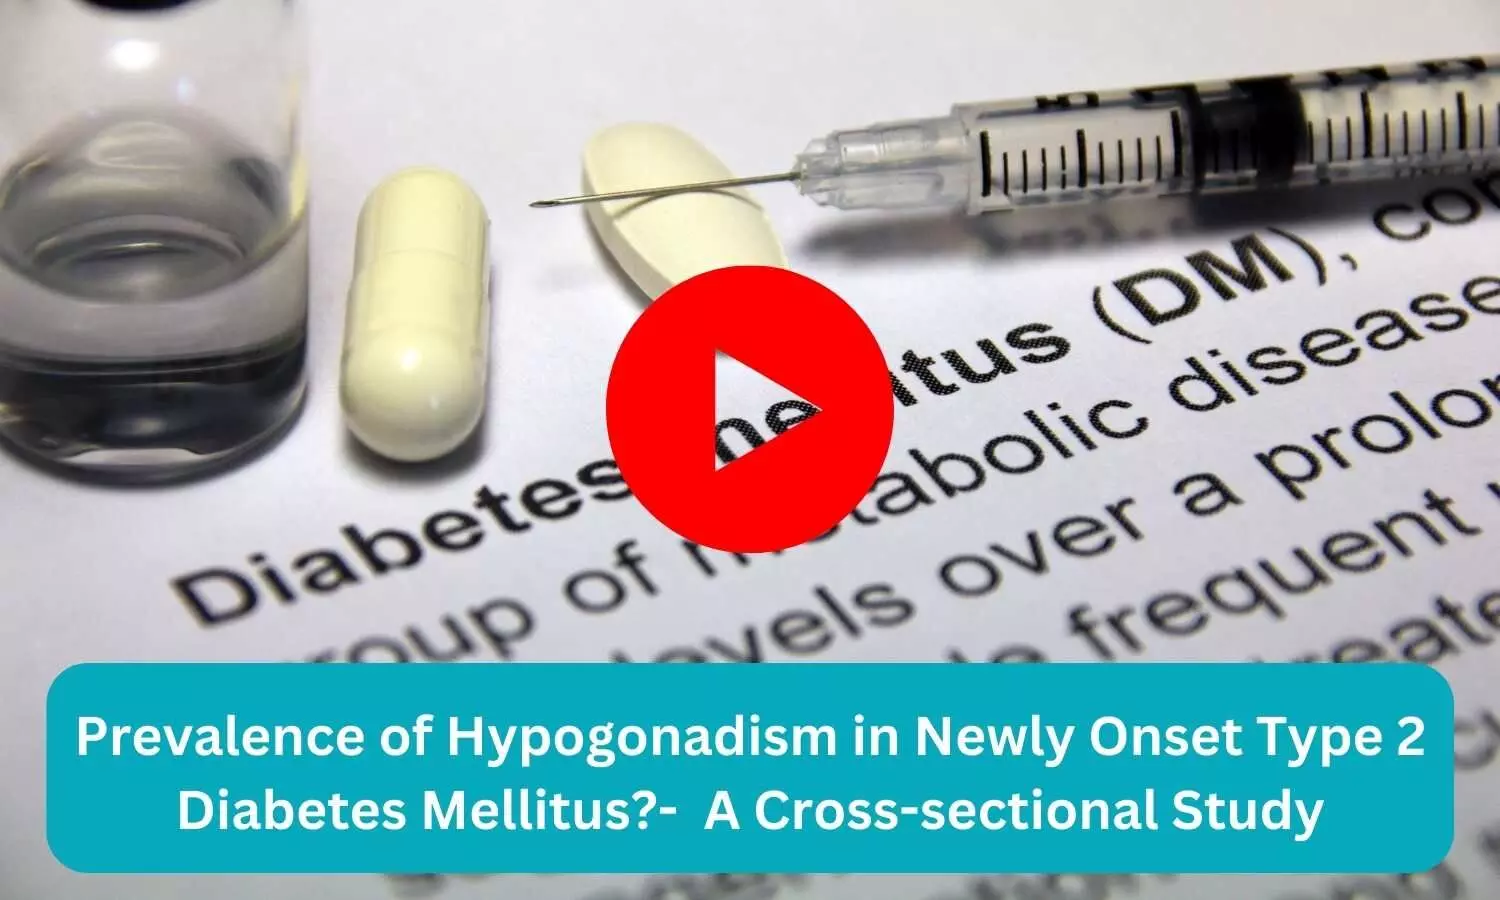 Prevalence of Hypogonadism in Newly Onset Type 2 Diabetes Mellitus?-  A Cross-sectional Study